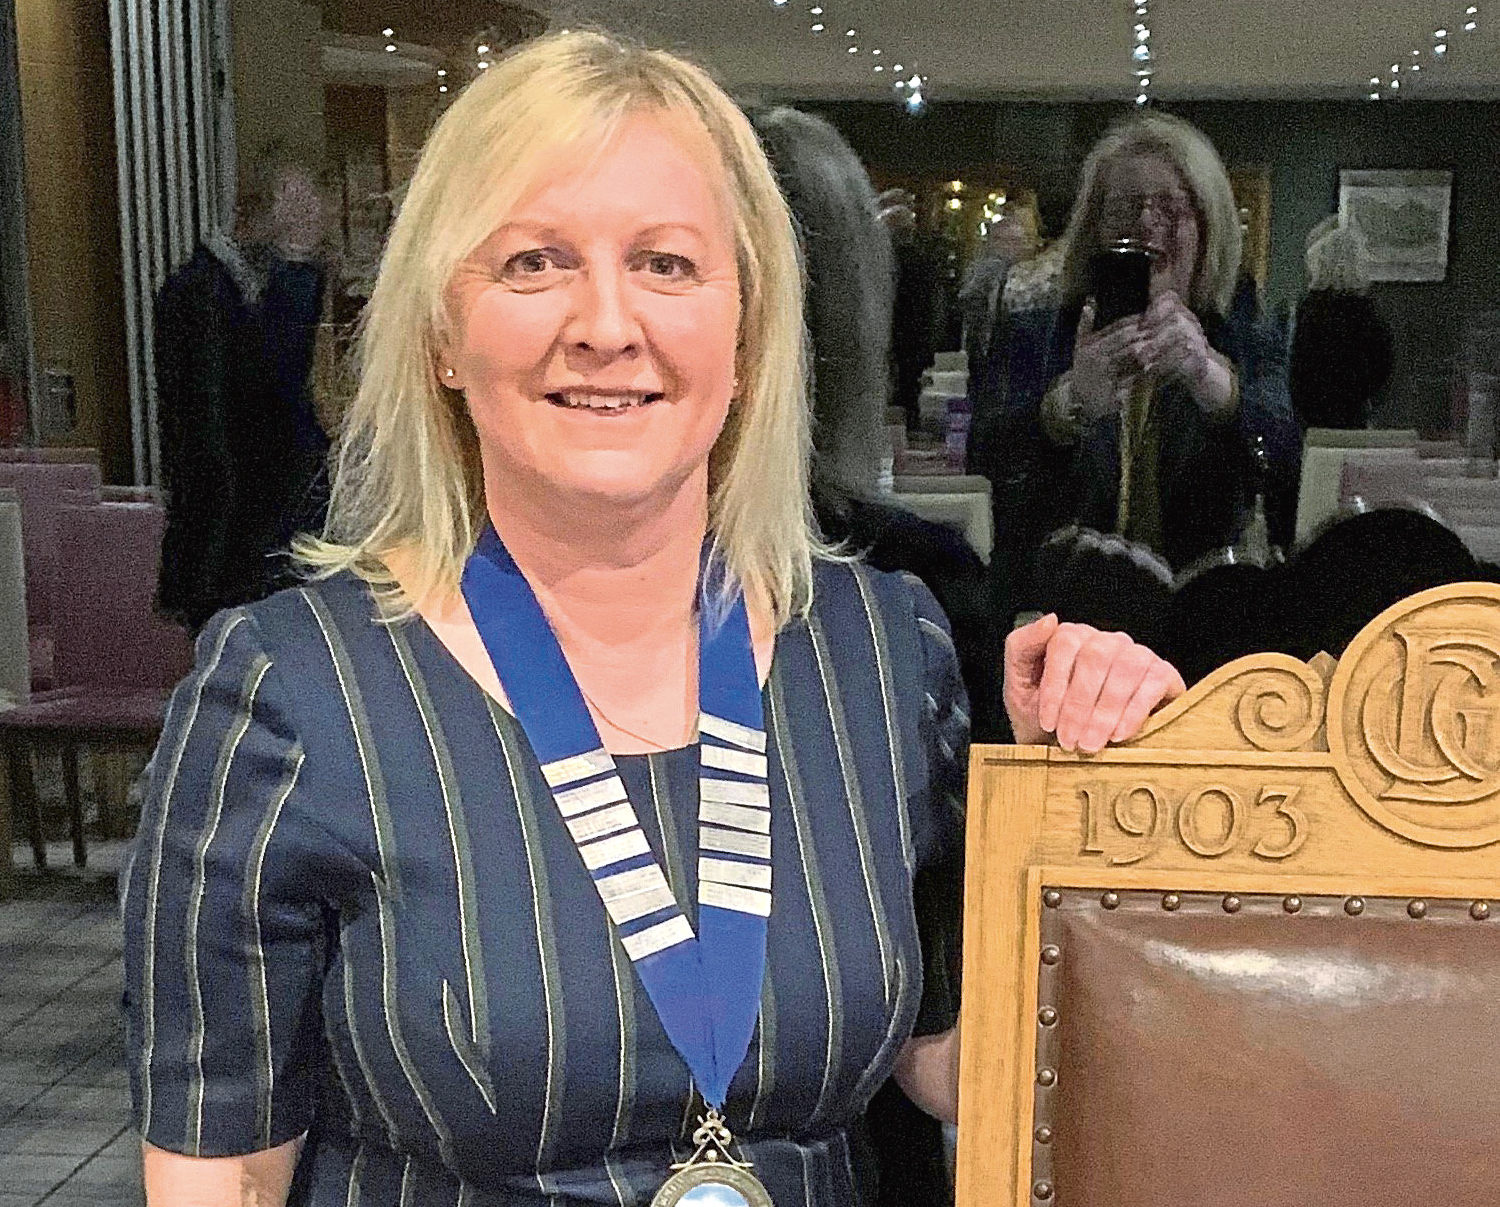 Elaine Farquharson-Black has become the first female to be elected Club Captain in the 117-year history of the prestigious Deeside Golf Club - an appointment traditionally held by a male member.